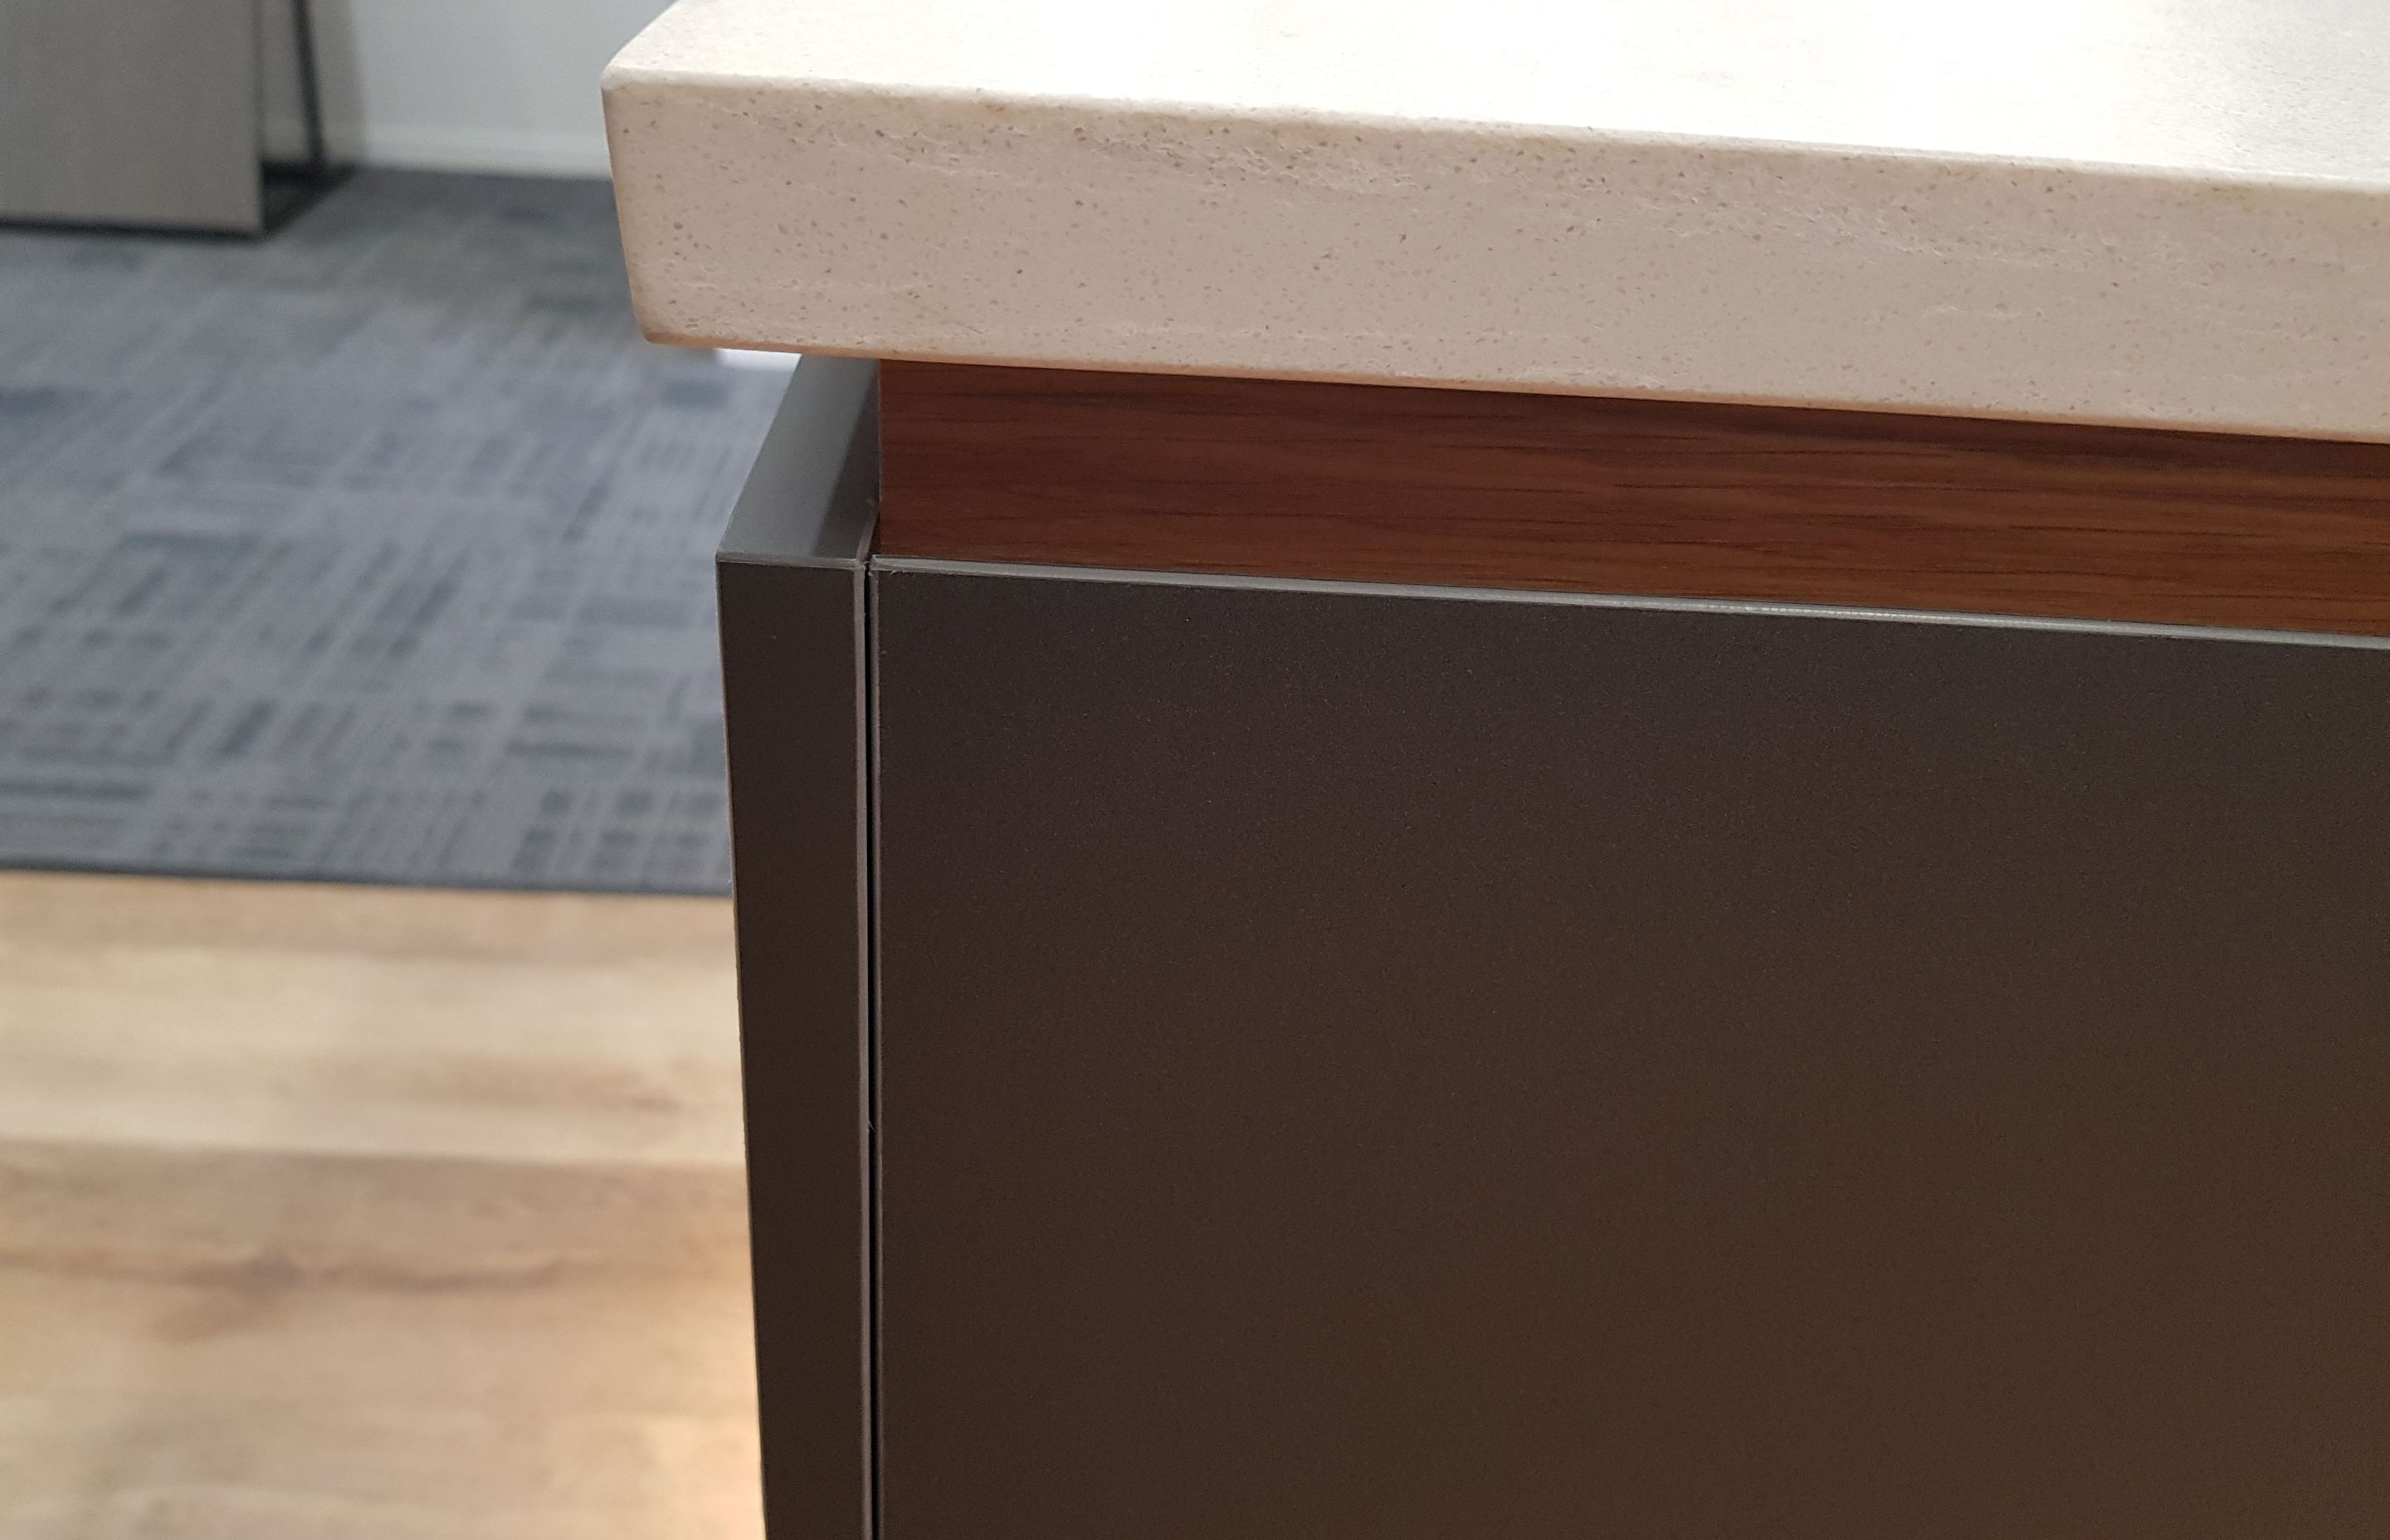 Premium Acrylic panels on MDF boards for all the cabinet and drawer fronts. Recessed Veneer below the stone engineered countertop gives the benchtop an appearance of floating.